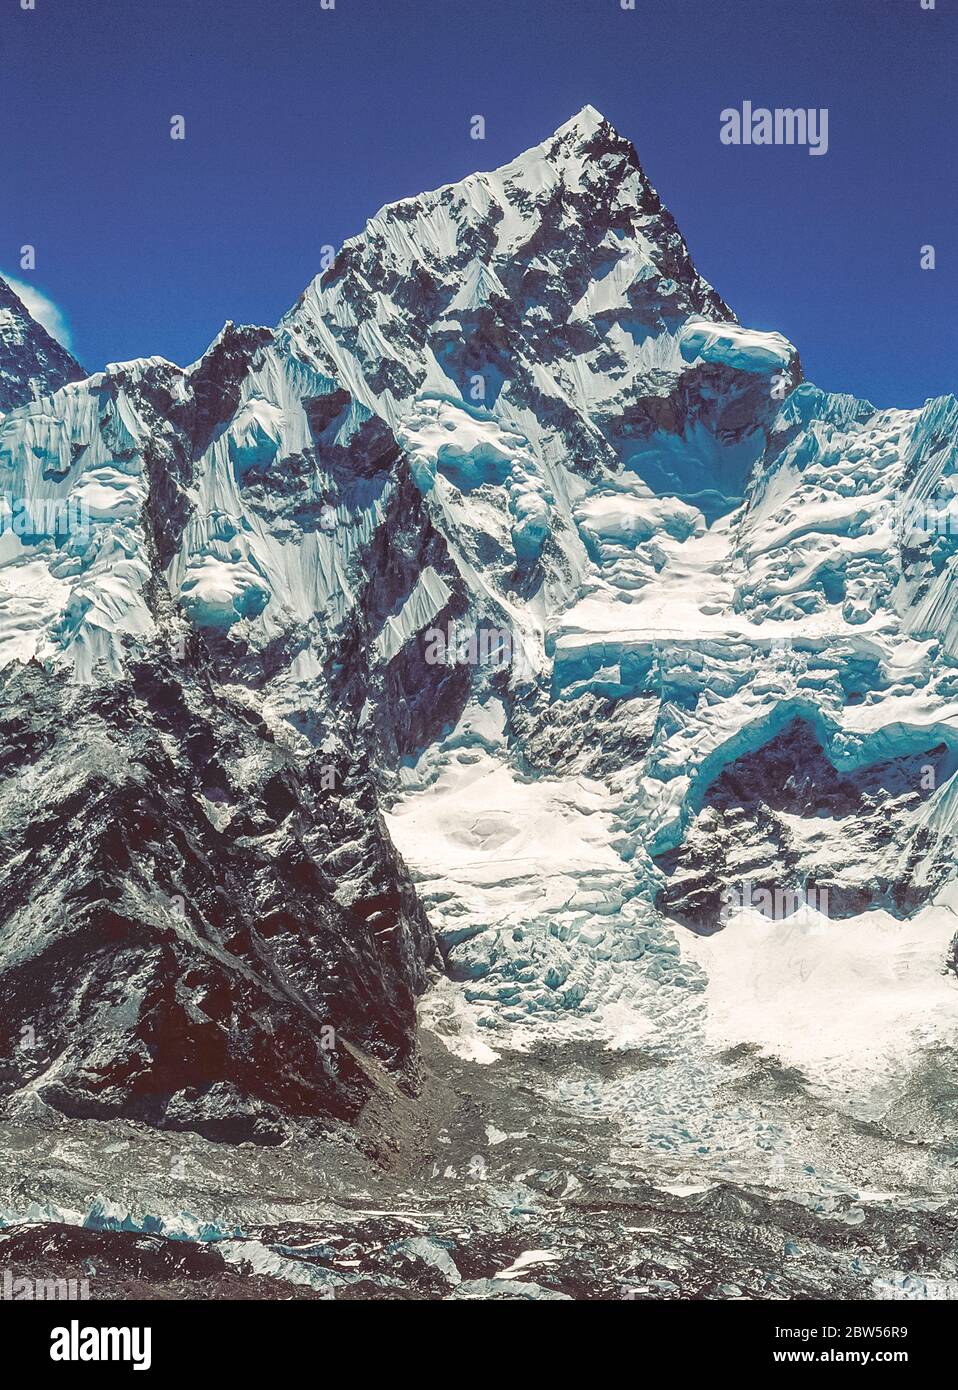 Nepal. Mount Everest [Chomolongma] 8848m the highest mountain in the world with its close neighbour Nuptse 7906m as seen here from Kalar Patar above Gorak Shep pasture Stock Photo